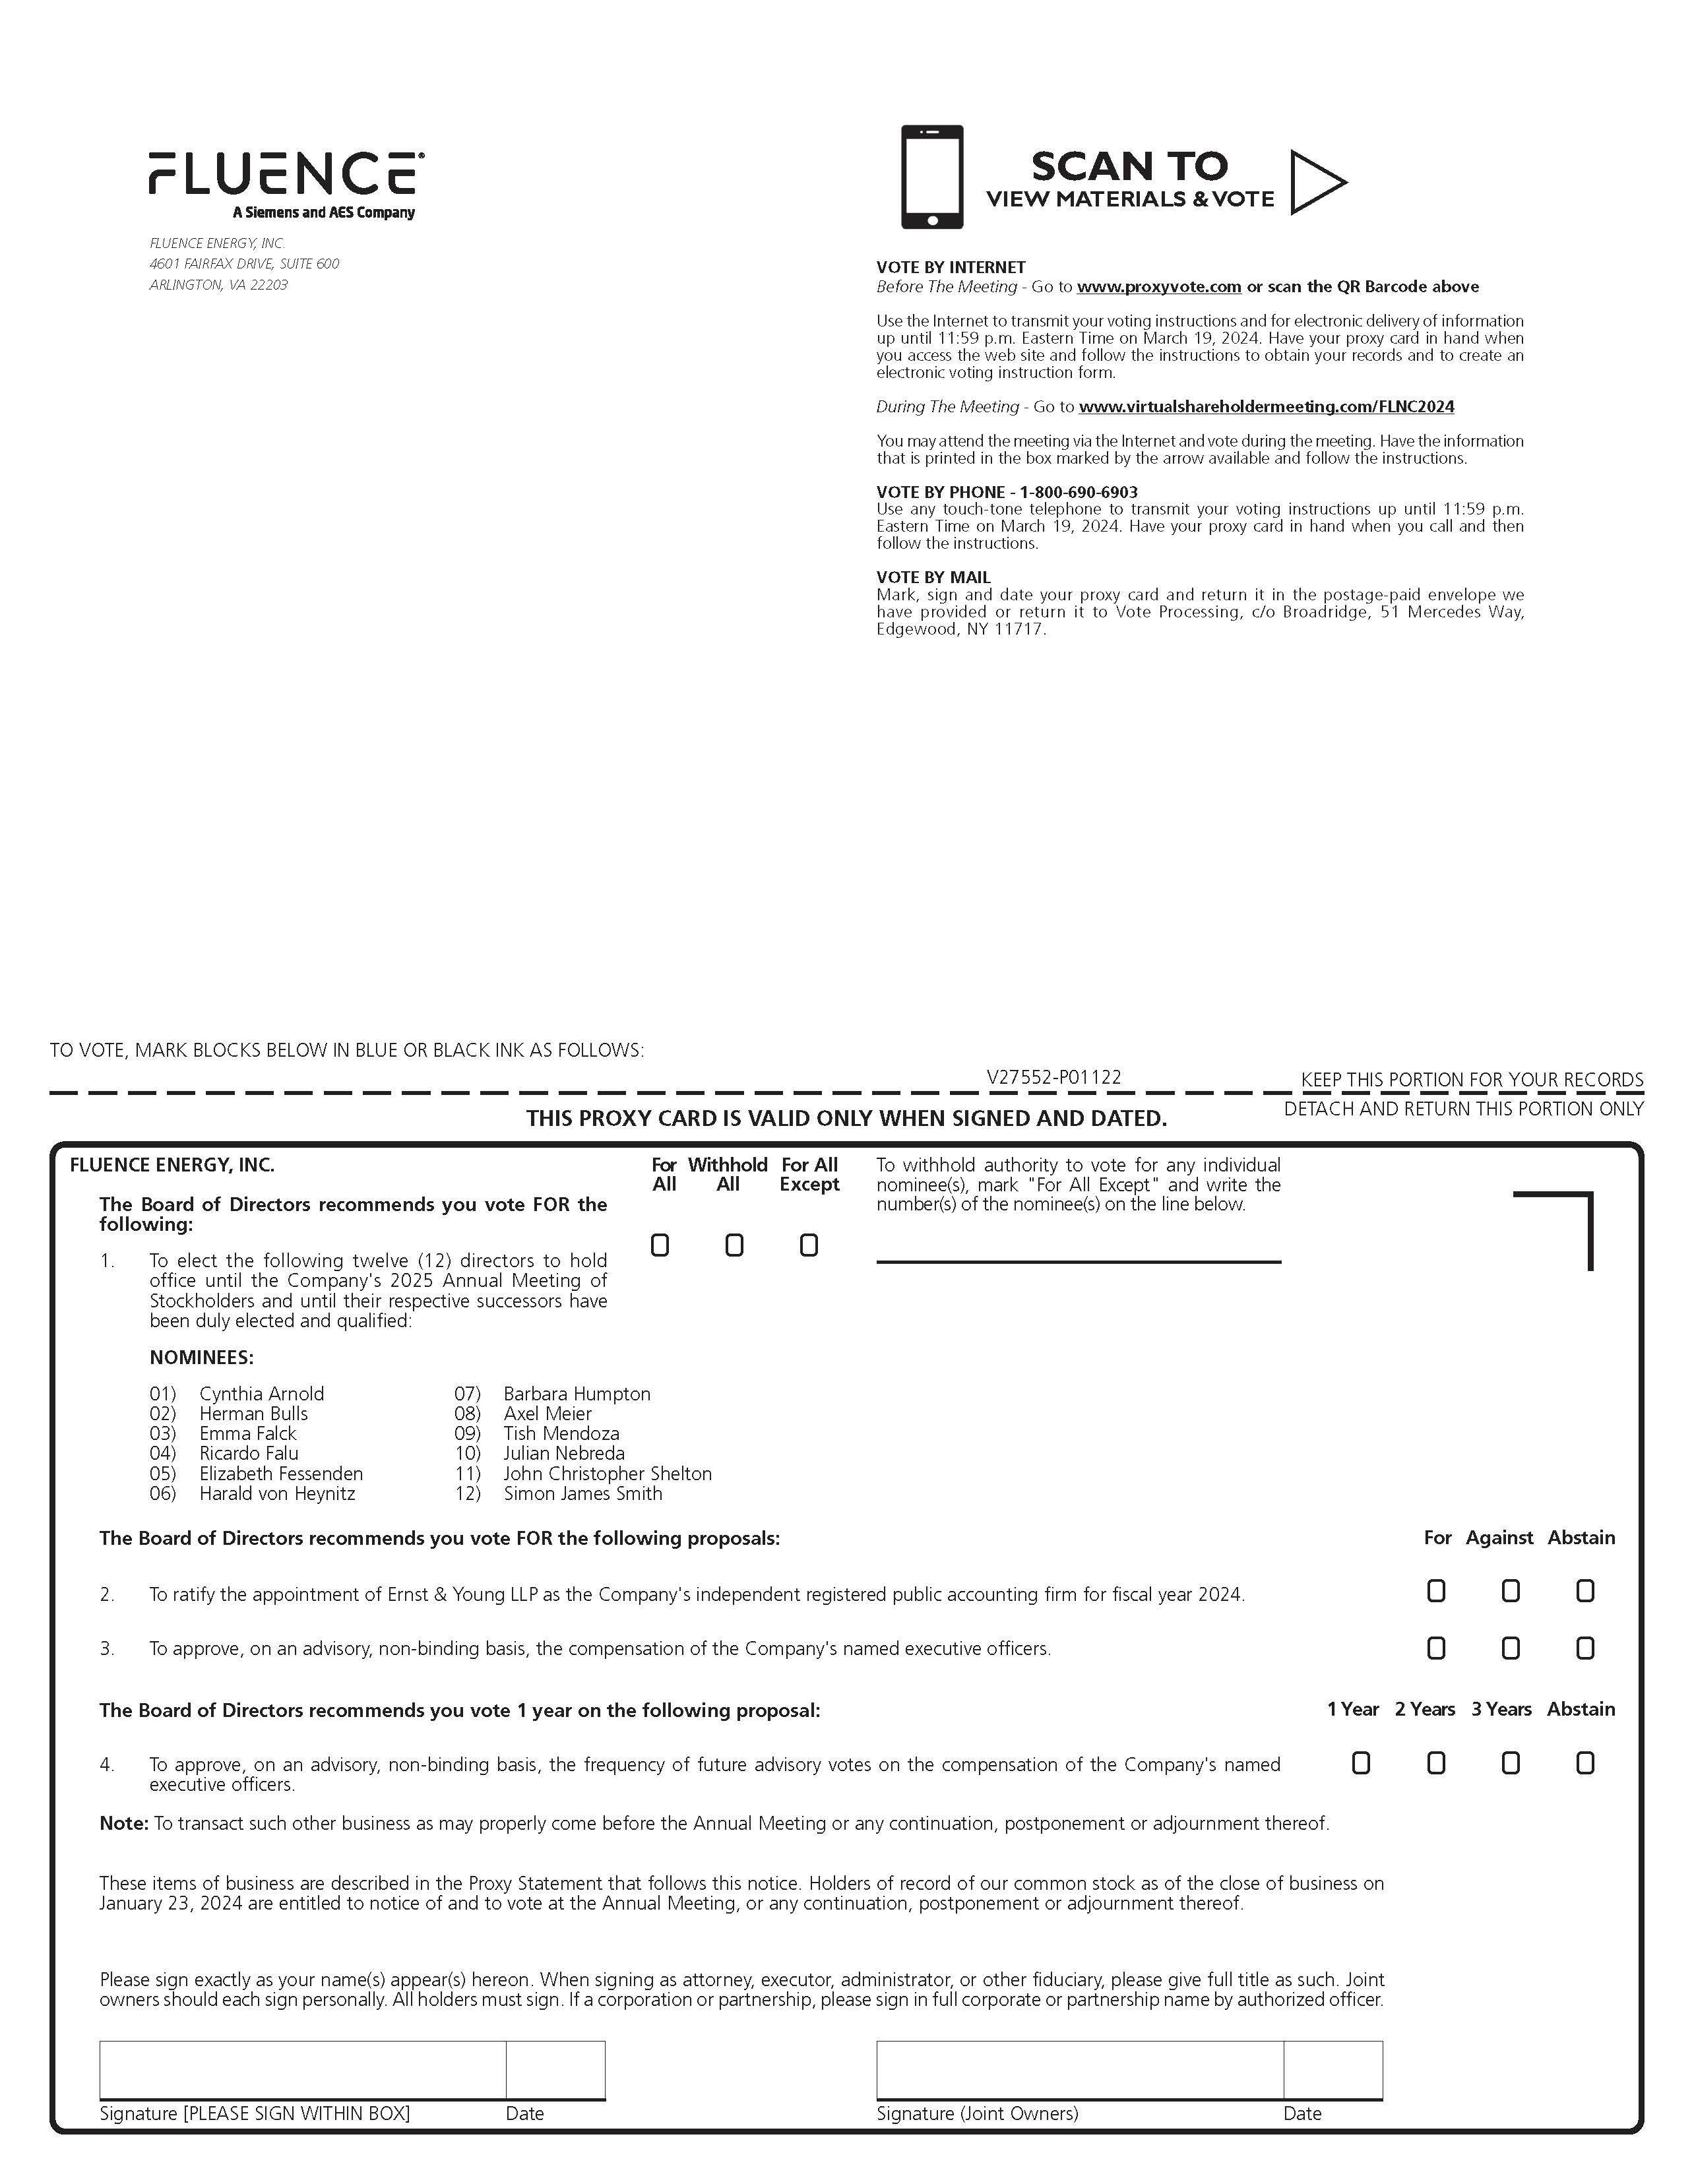 Pages from FLUENCE ENERGY INC._V_PRXY_GT20_P01122_24(# 74712) - C2 (004).jpg